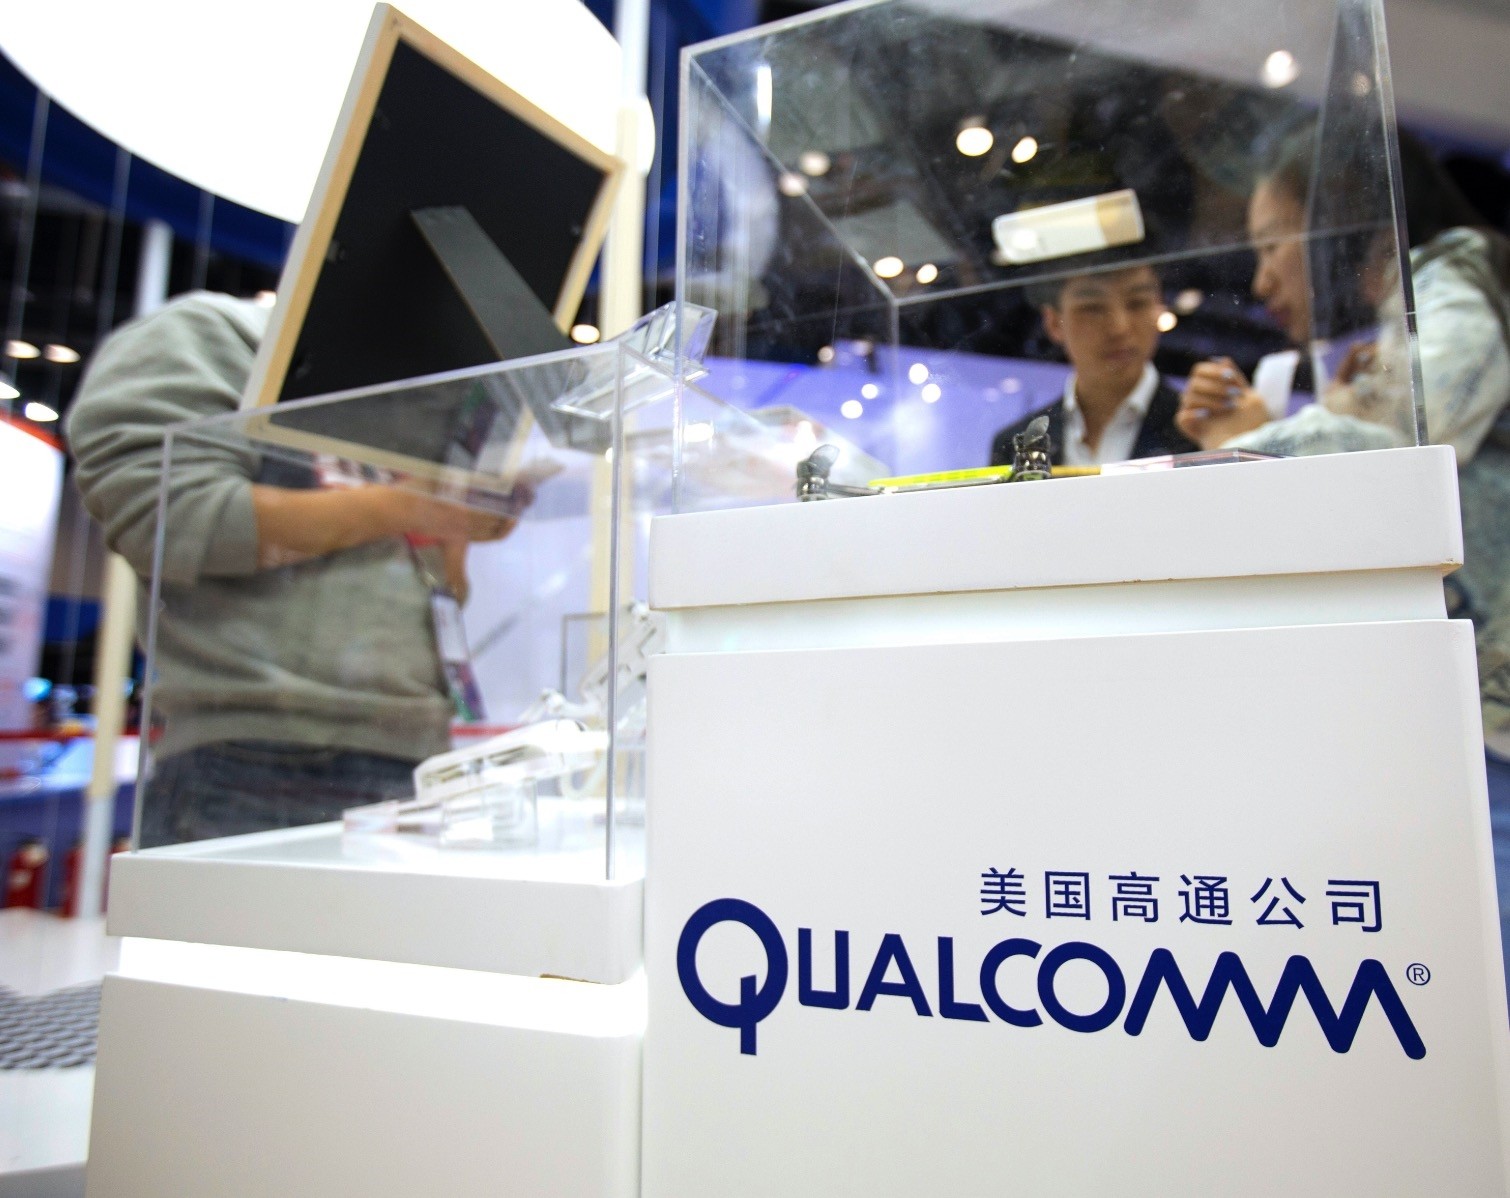 Visitors look at a display booth for Qualcomm at the Global Mobile Internet Conference in Beijing.